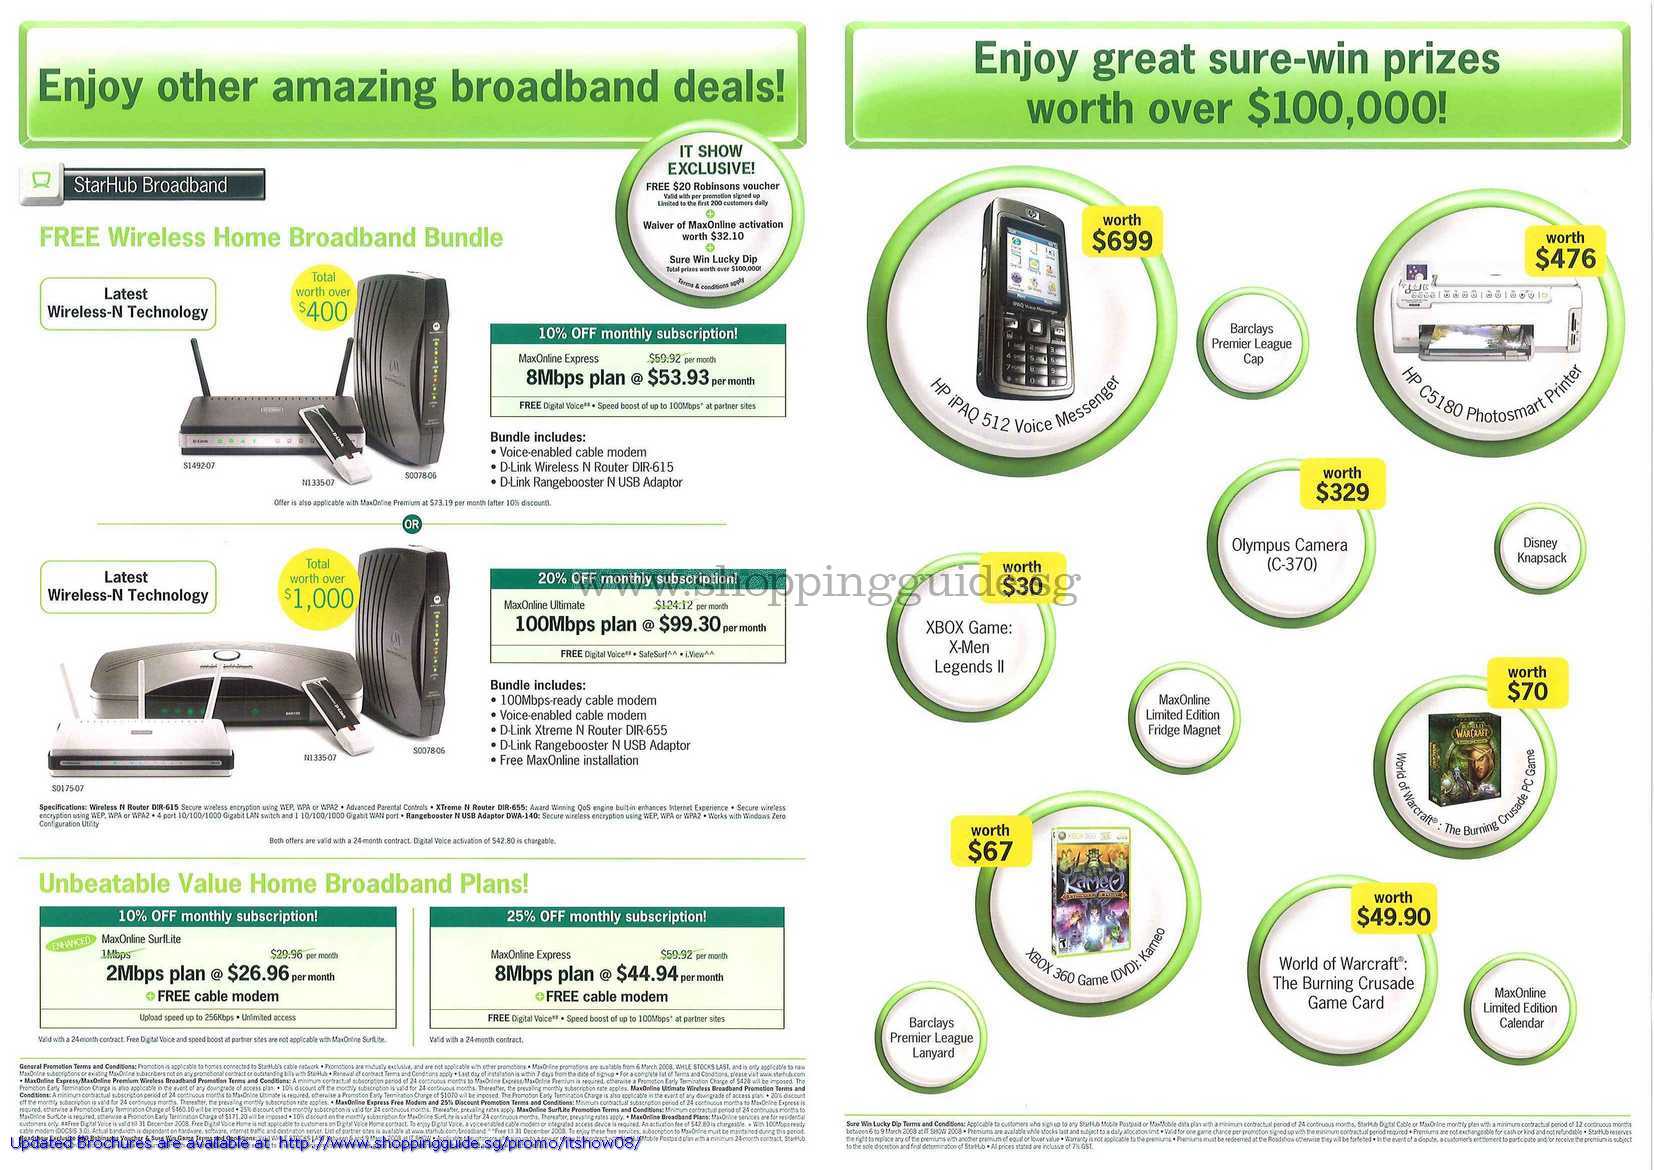 IT Show 2008 price list image brochure of Starhub Wireless Home Broadband D-Link Router